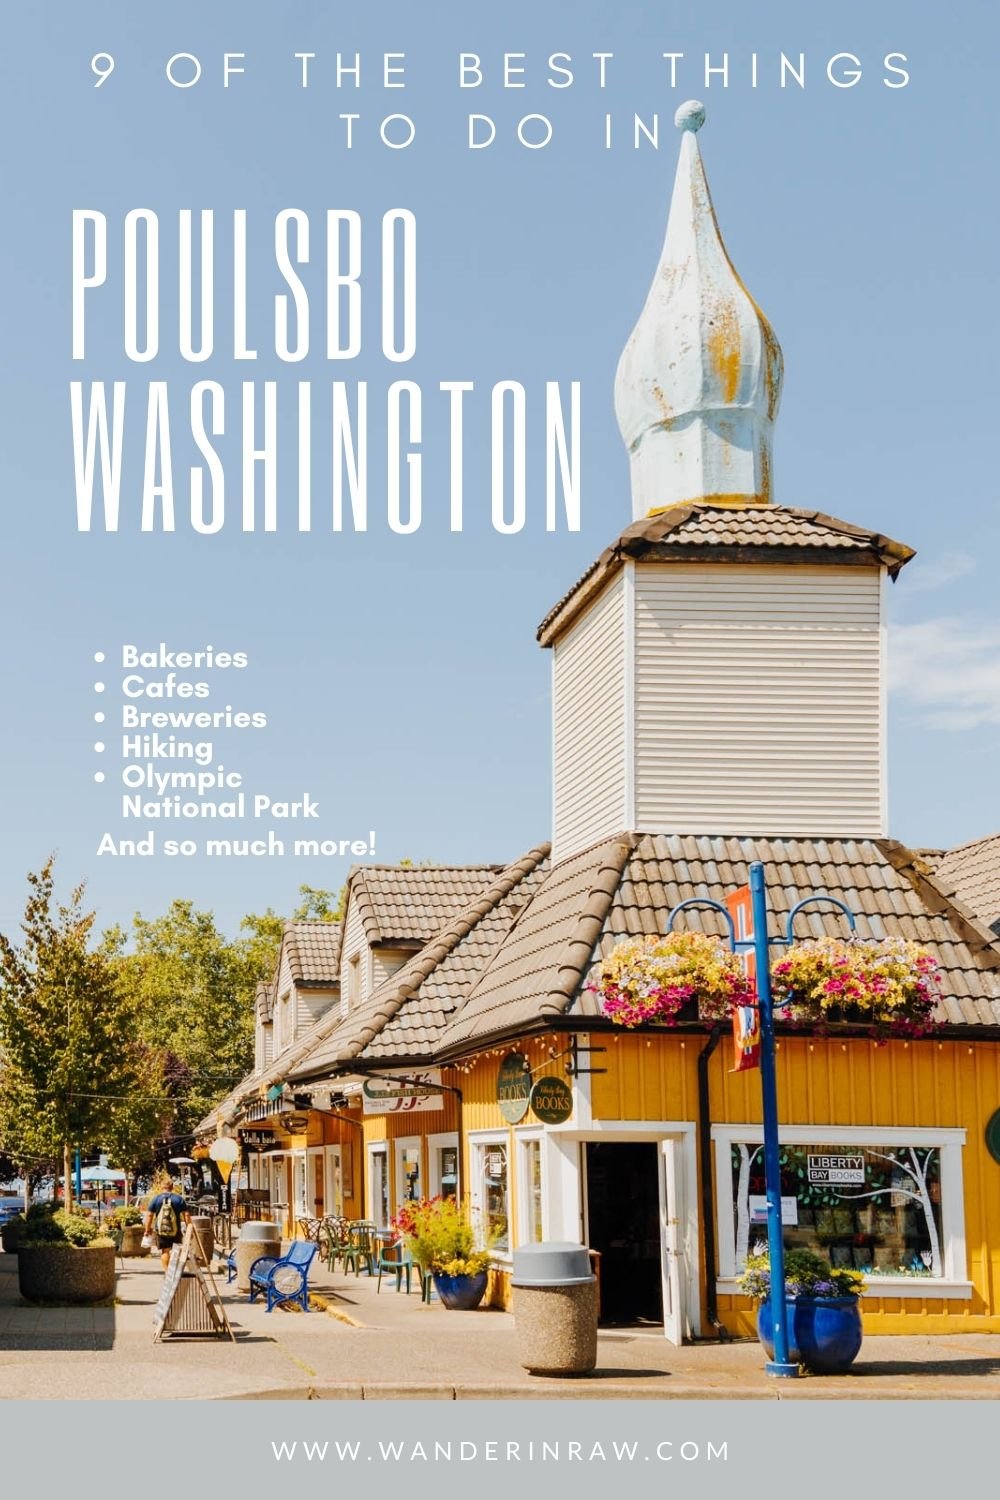 9 of The Best Things to do in Poulsbo, WA